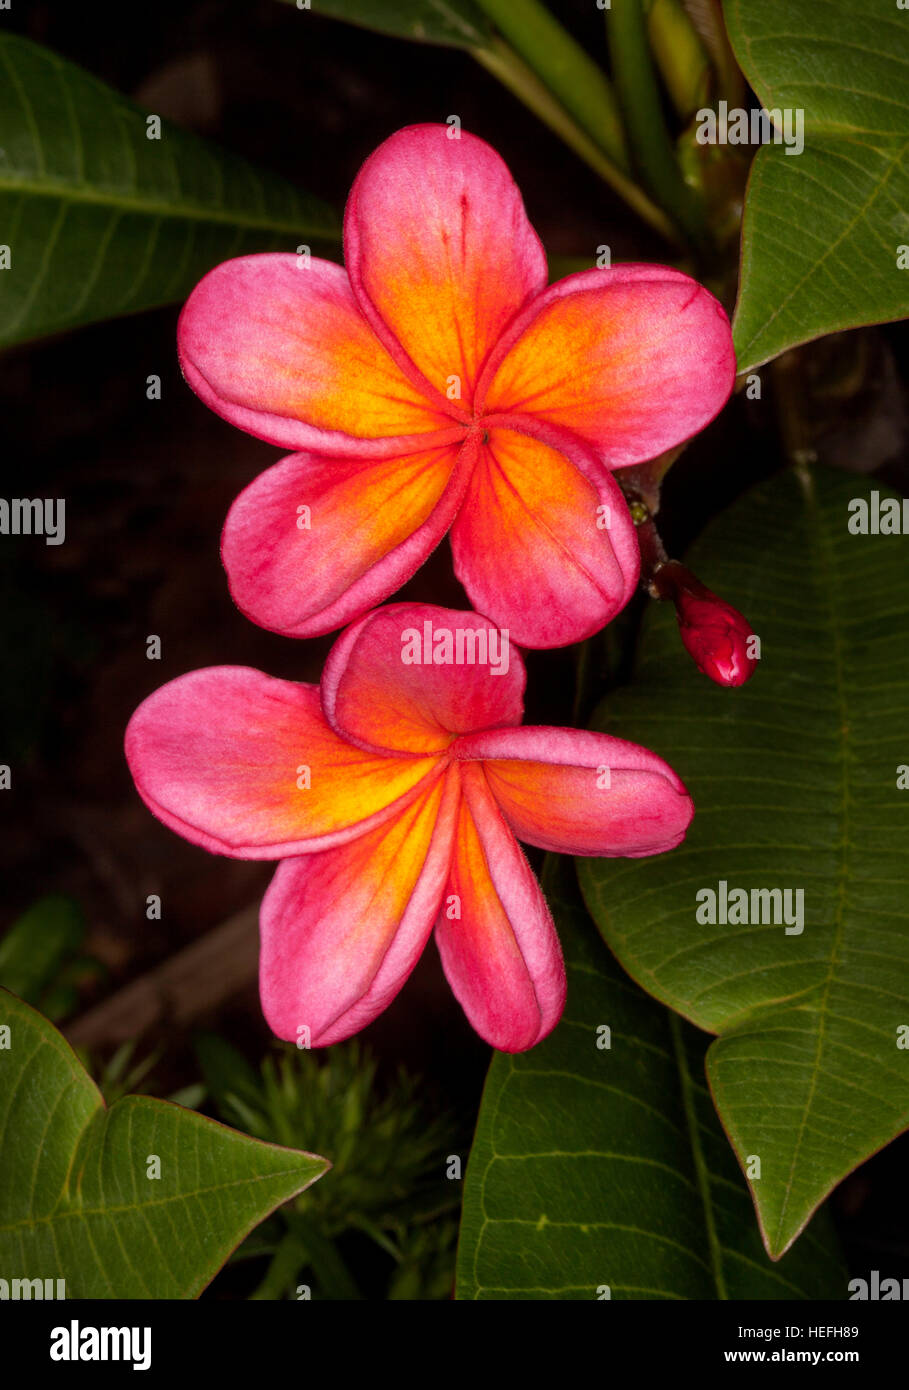 Vivid Red Yellow Perfumed Flowers Bud And Dark Green Leaves Of Stock Photo Alamy